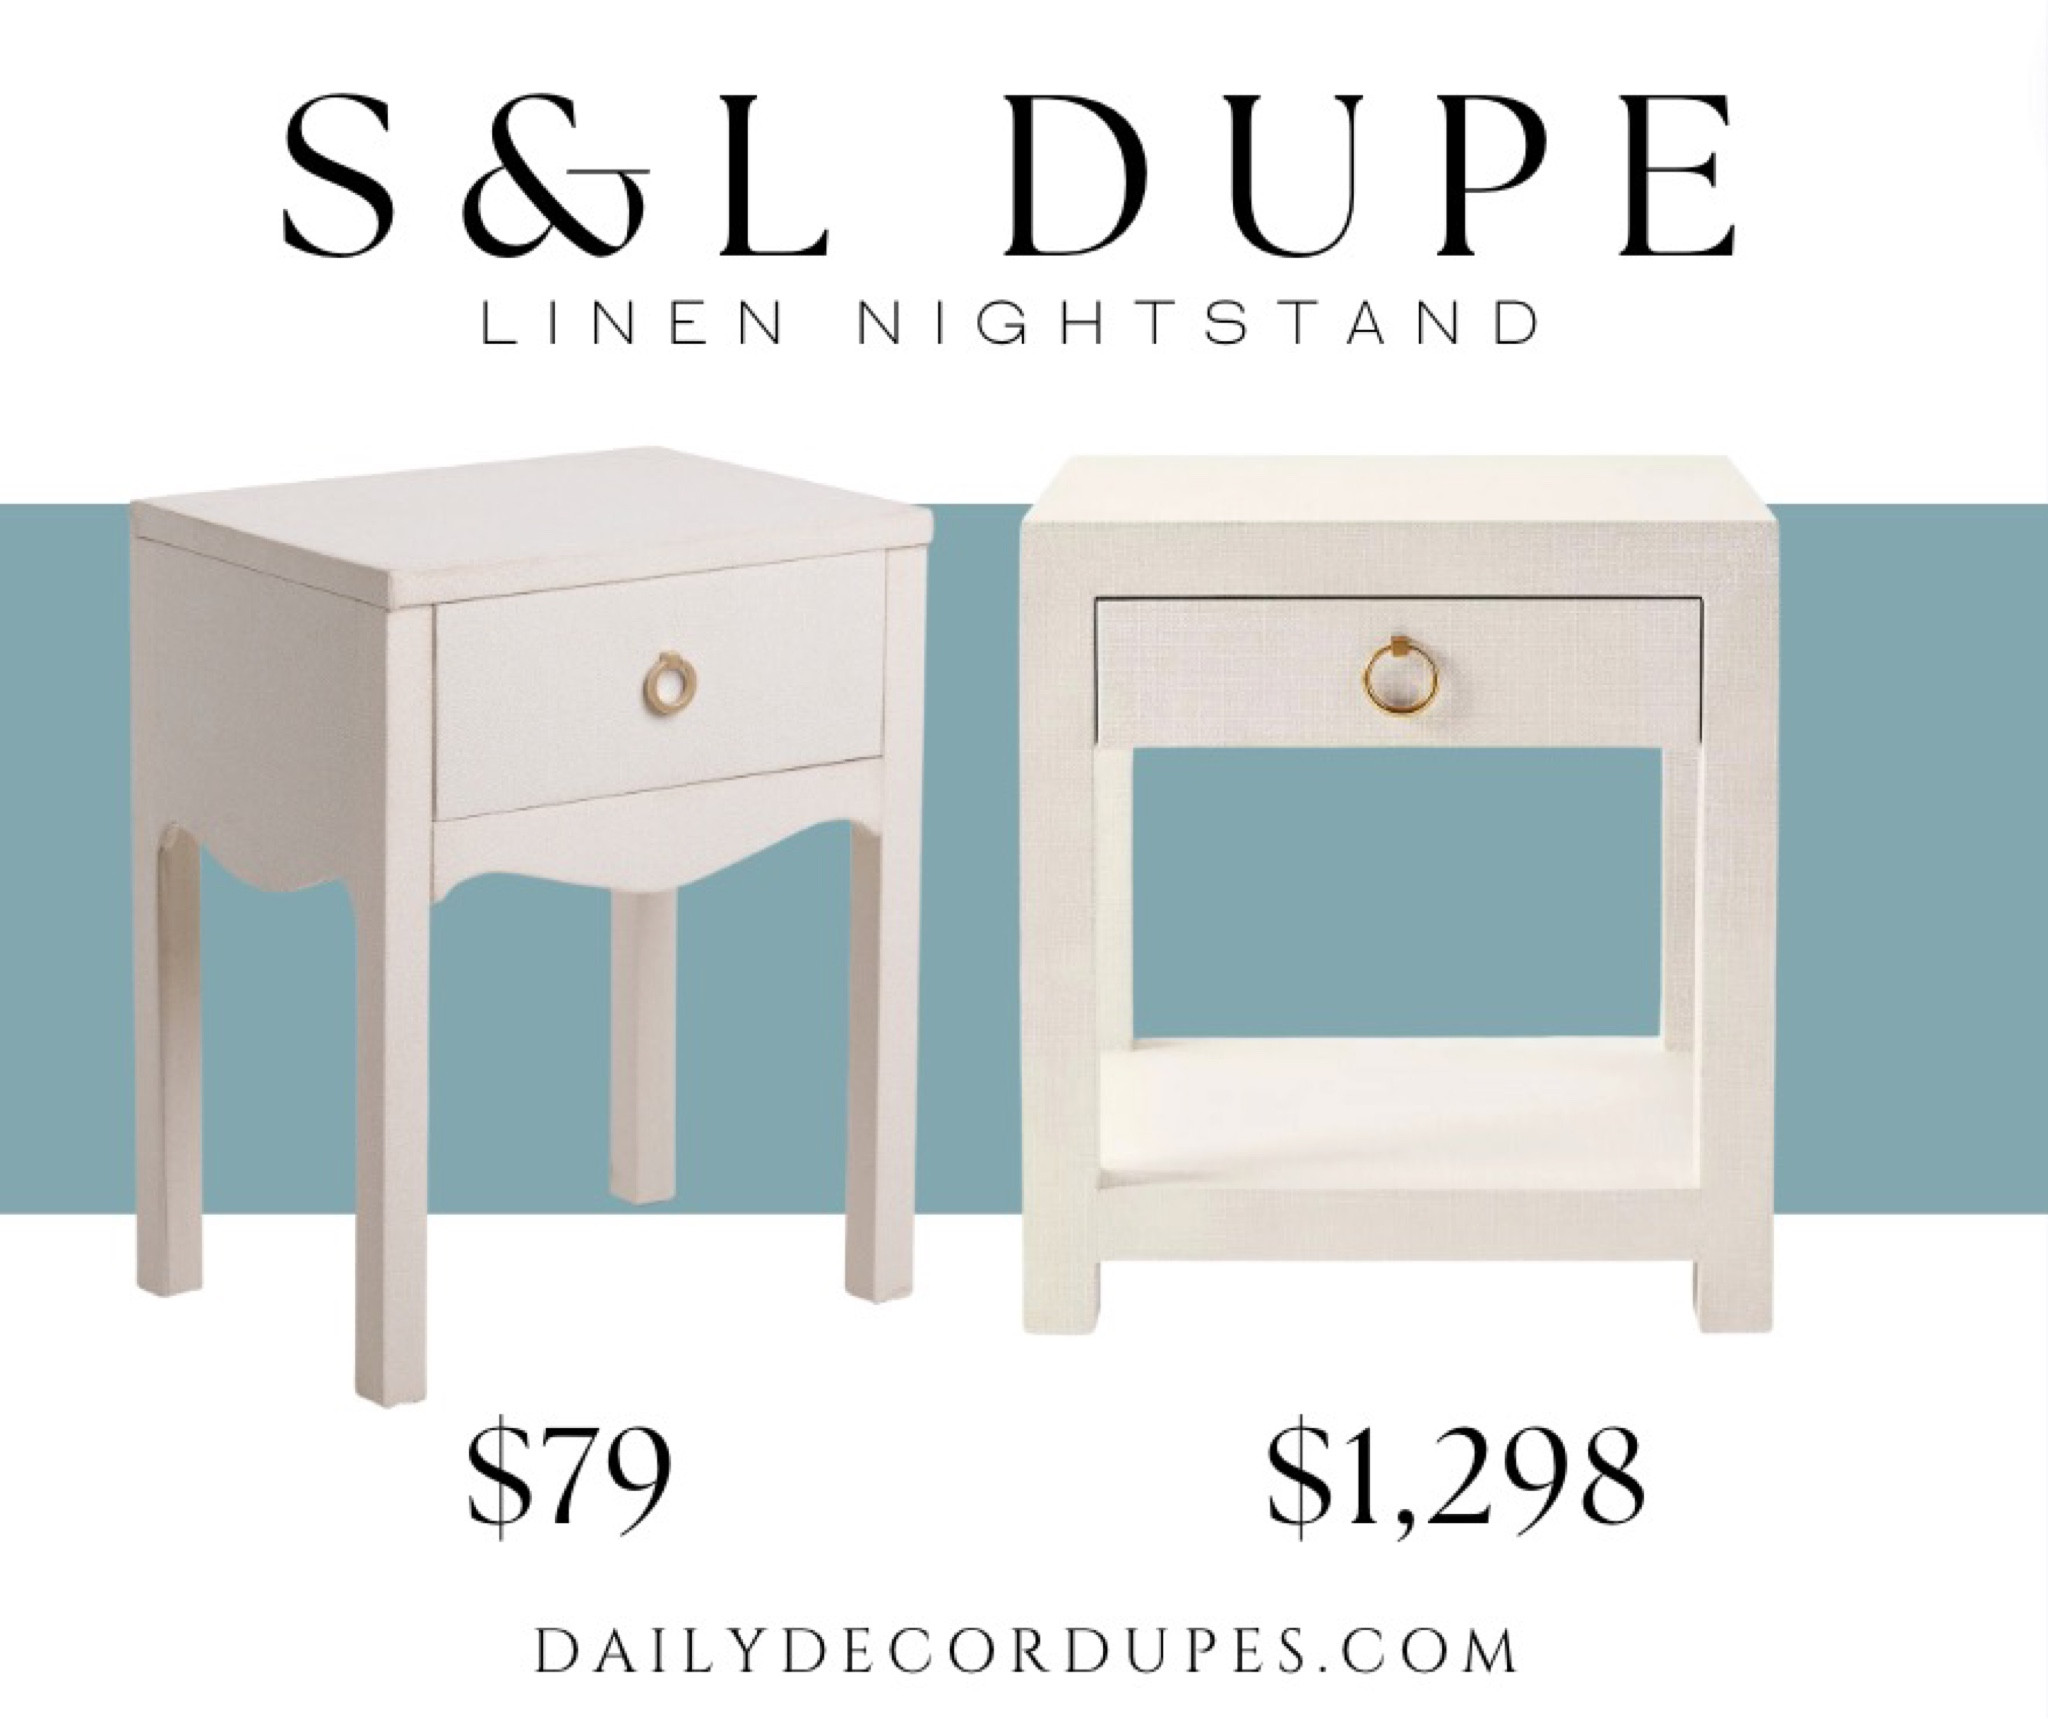 DAILY DUPES - VP of STYLE